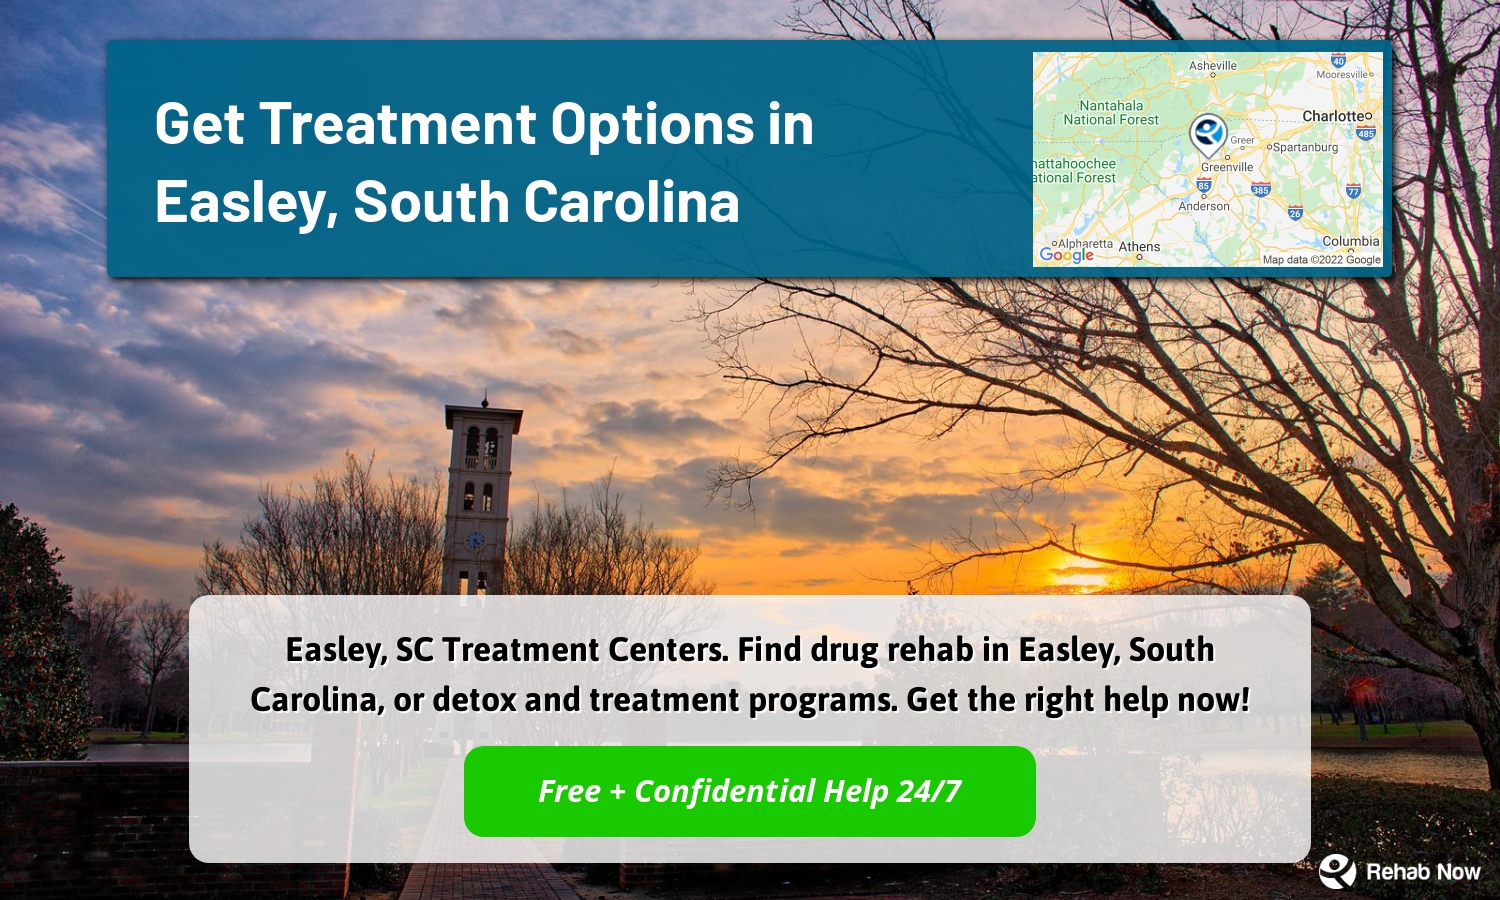 Easley, SC Treatment Centers. Find drug rehab in Easley, South Carolina, or detox and treatment programs. Get the right help now!